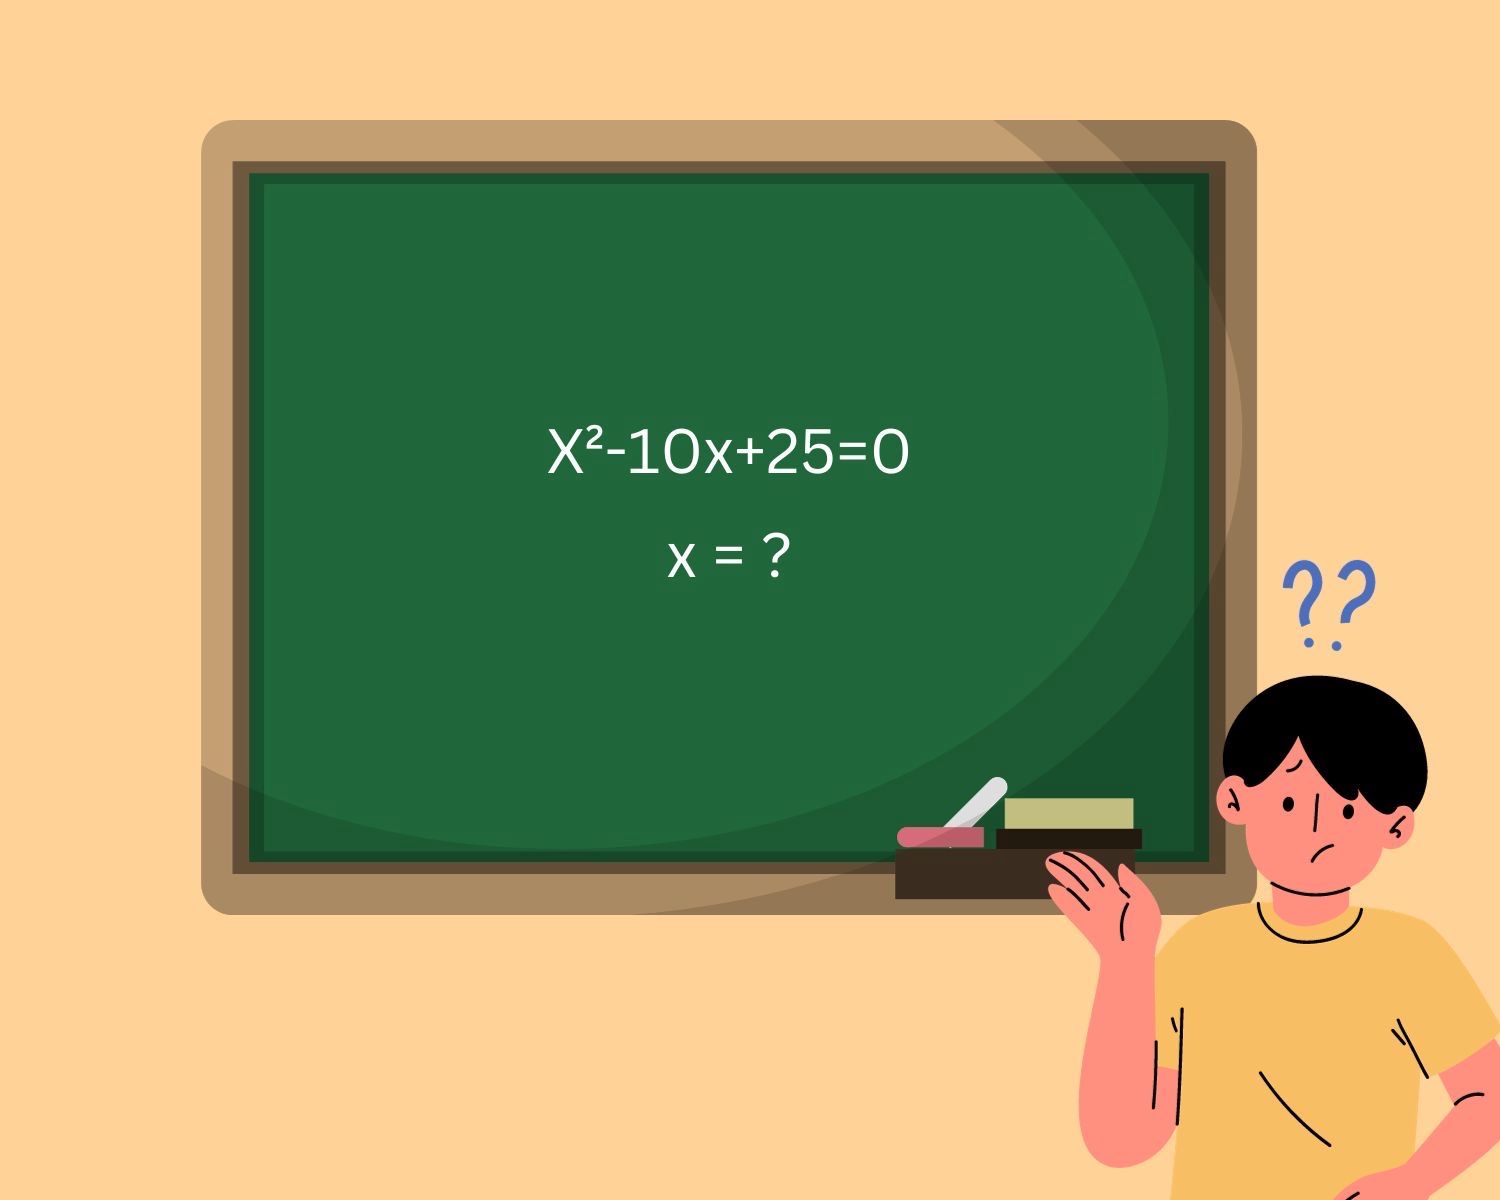 Discover The Secret To Finding The Roots Of X²-10x+25=0!